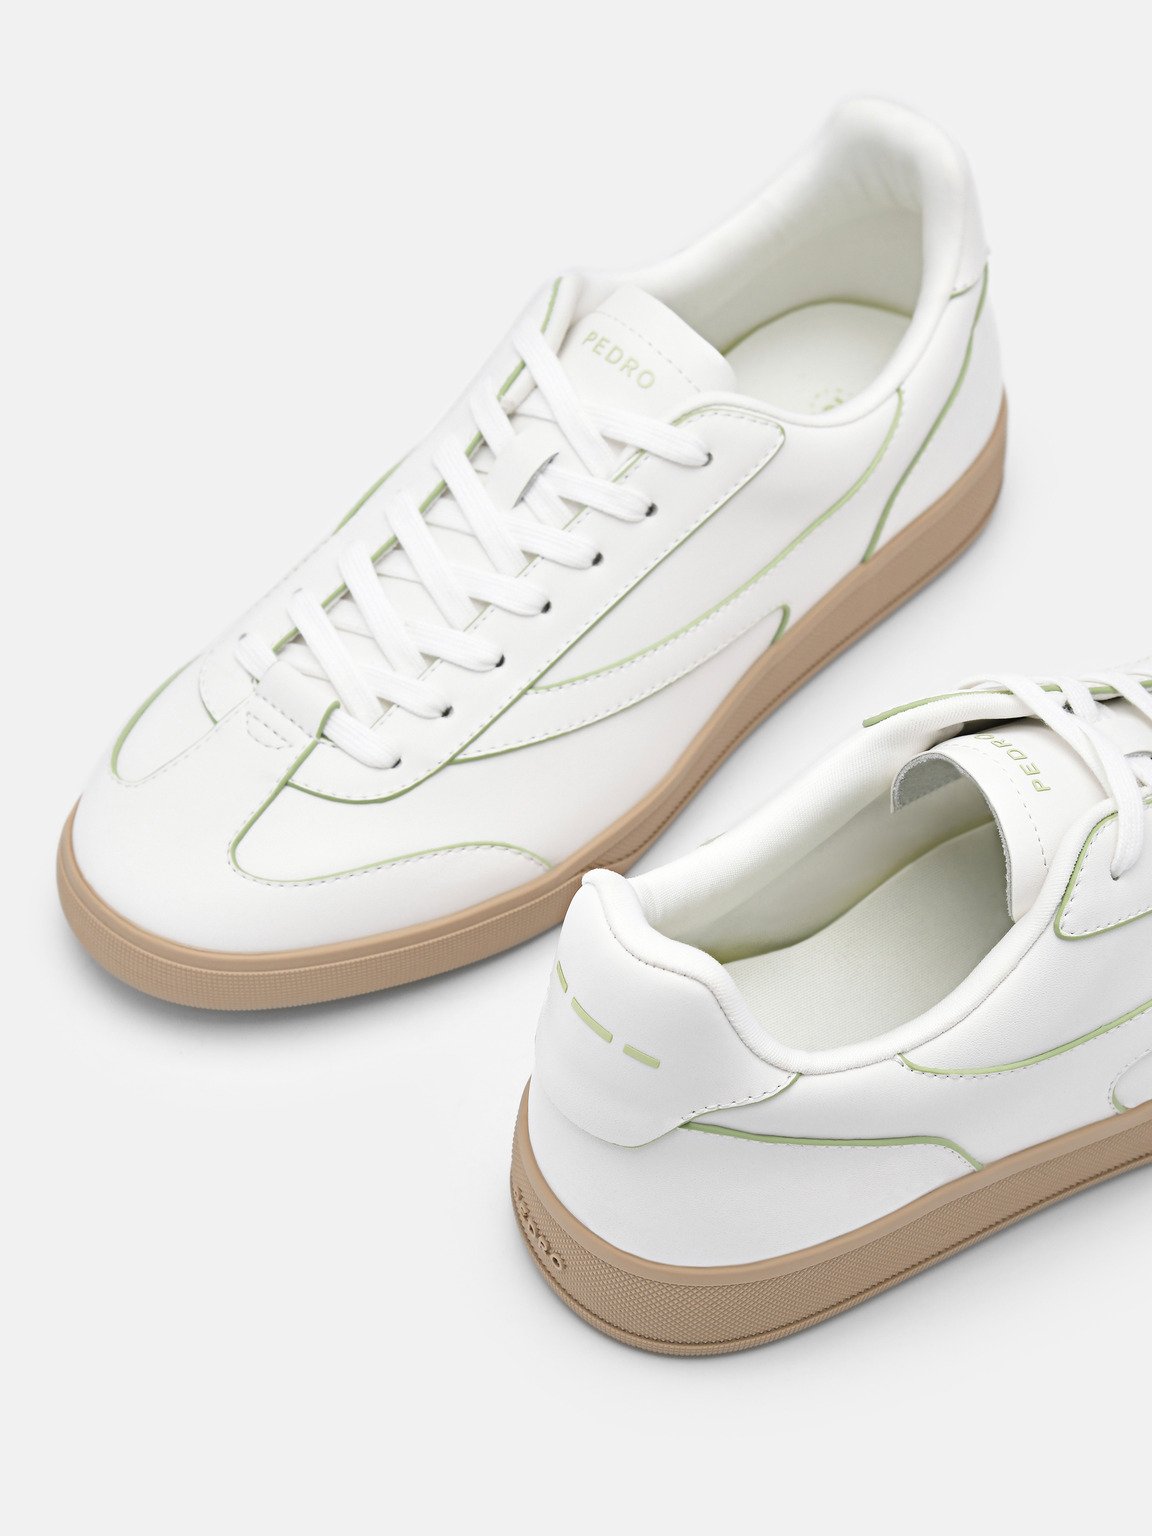 rePEDRO Recycled Leather Sneakers, White